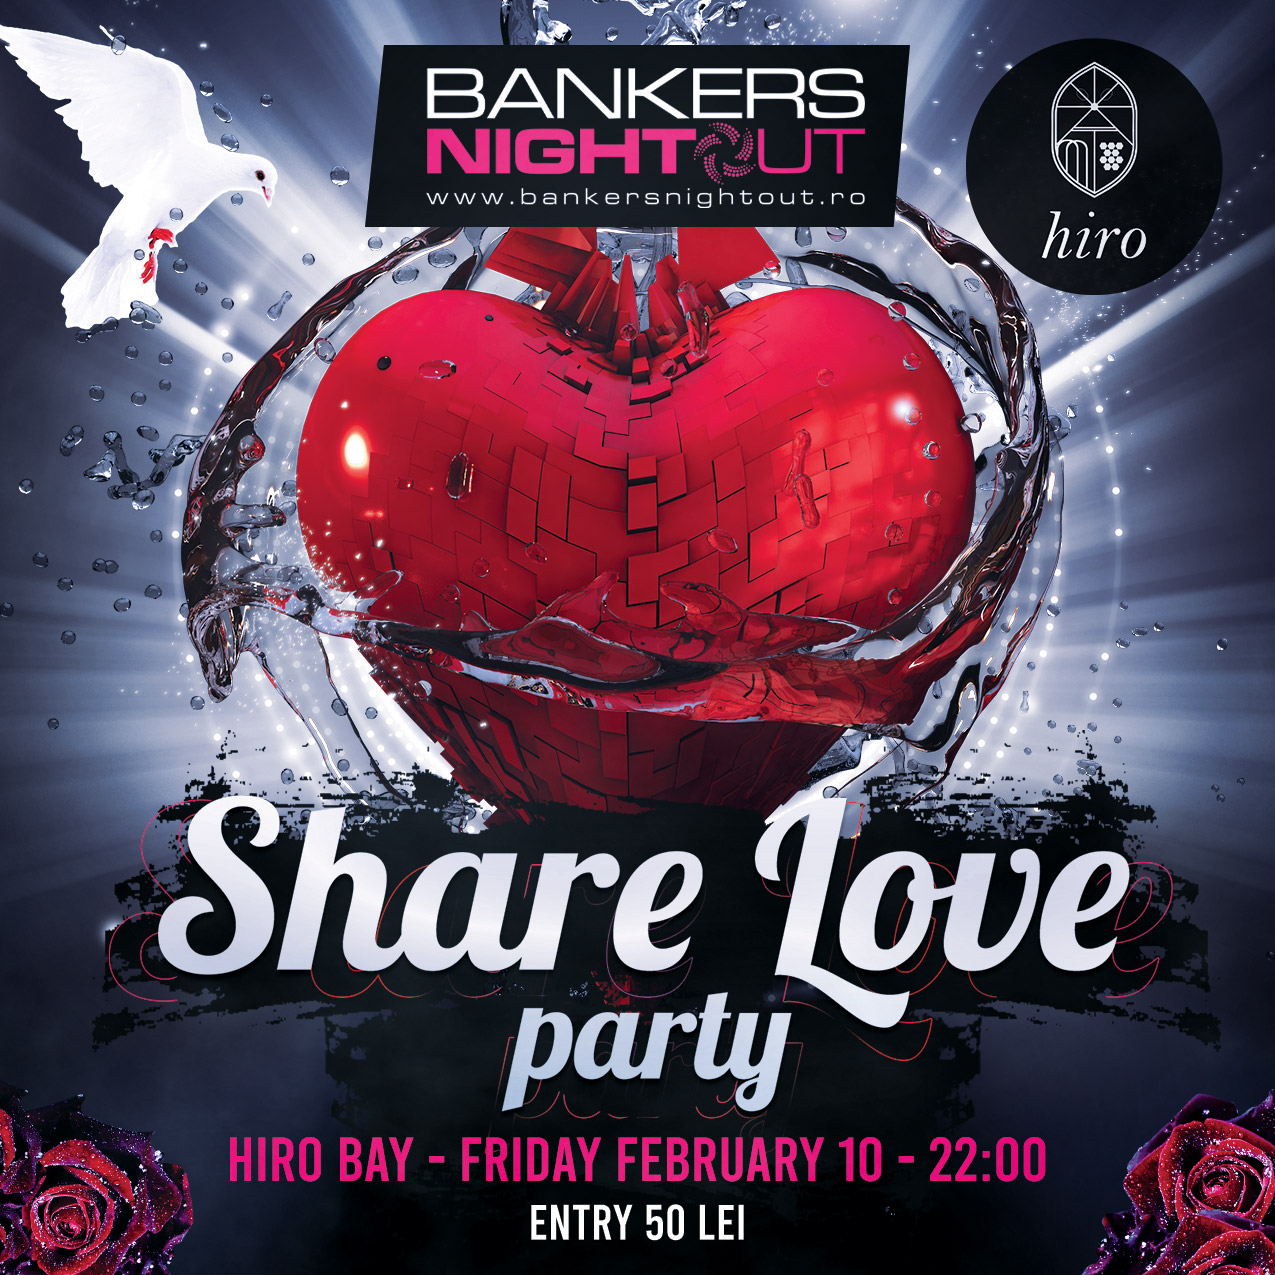 Bankers Night Out - Share Love Party 2023! - Do you want to party with your friends from banking?